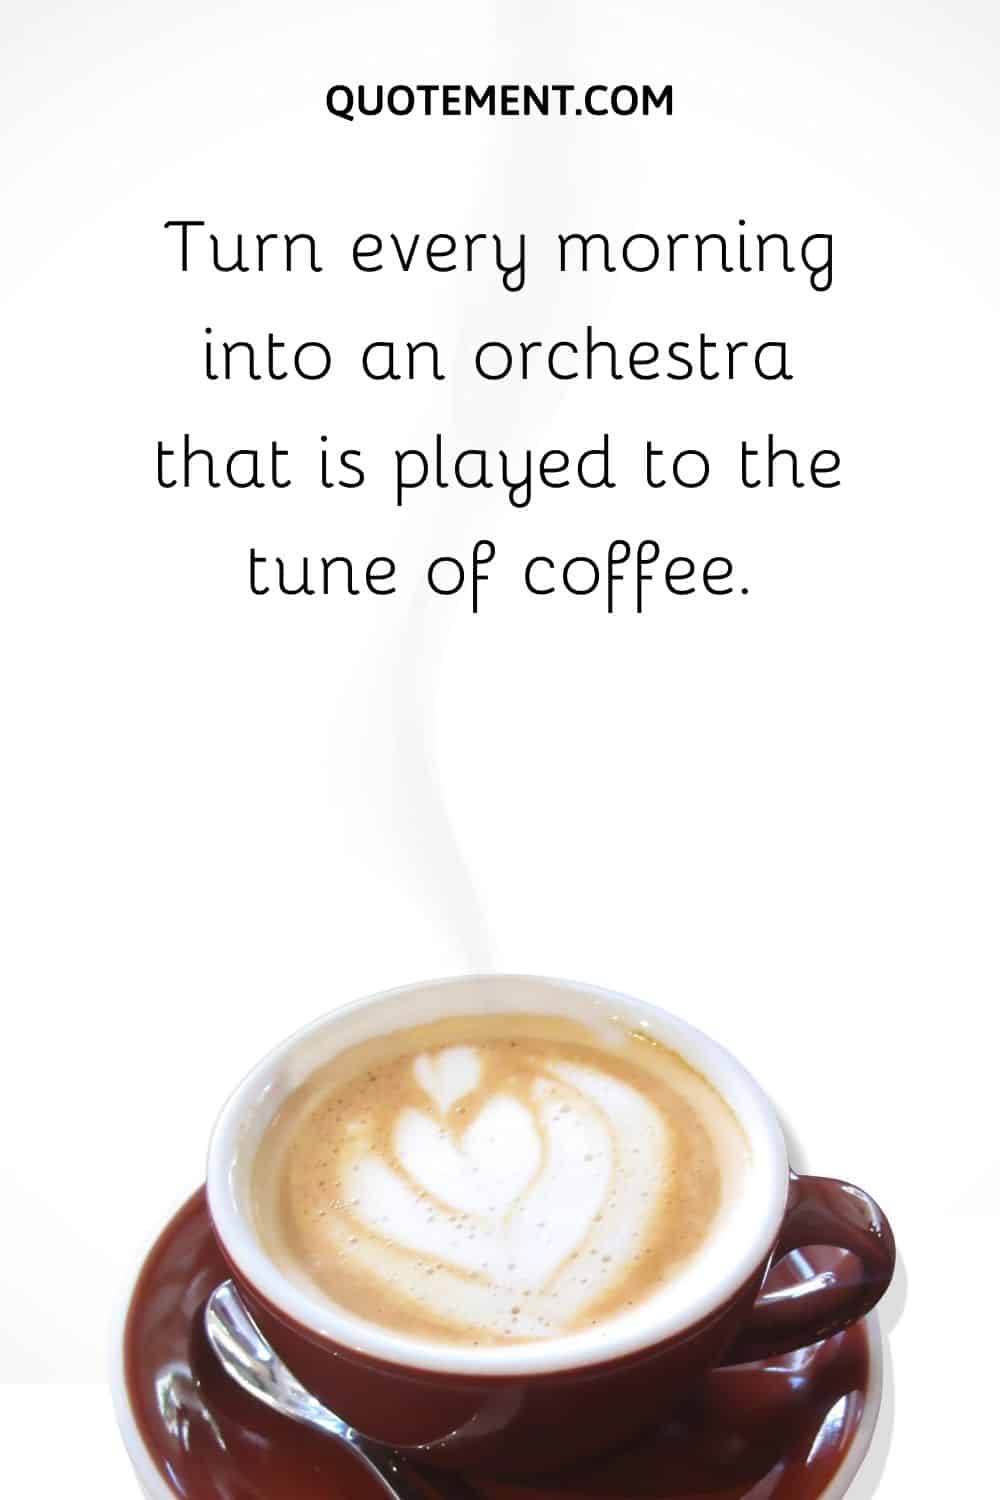 Turn every morning into an orchestra that is played to the tune of coffee